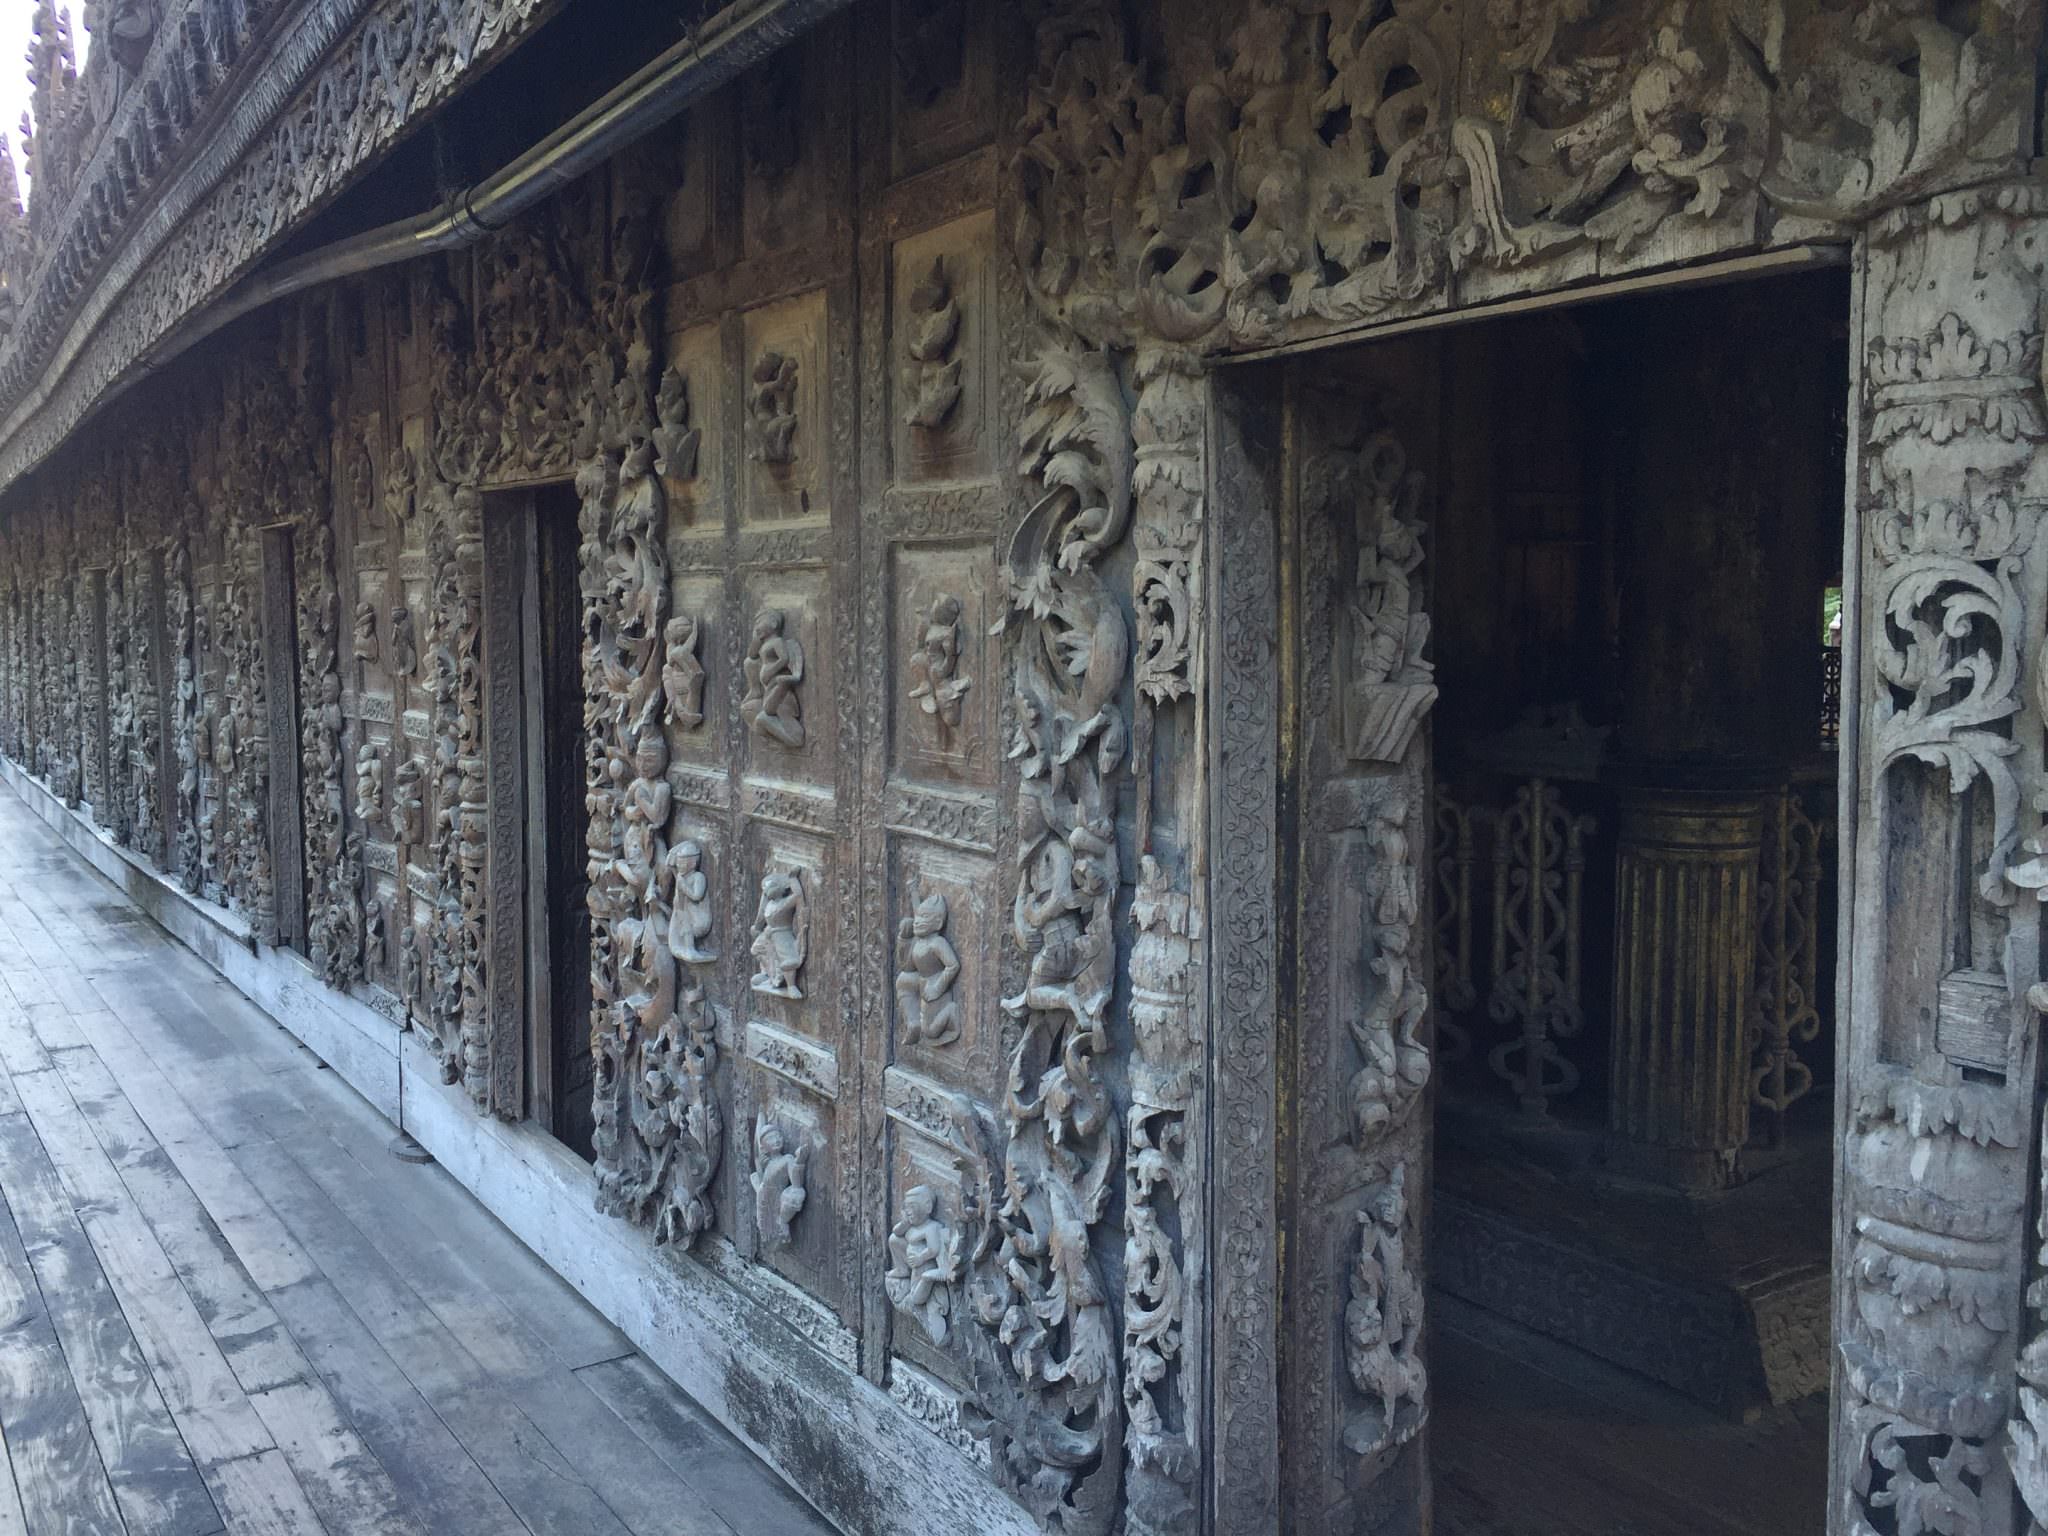 Every inch of the Palace is carved with stories and iconography of Buddhism. © 2015 Gail Jessen